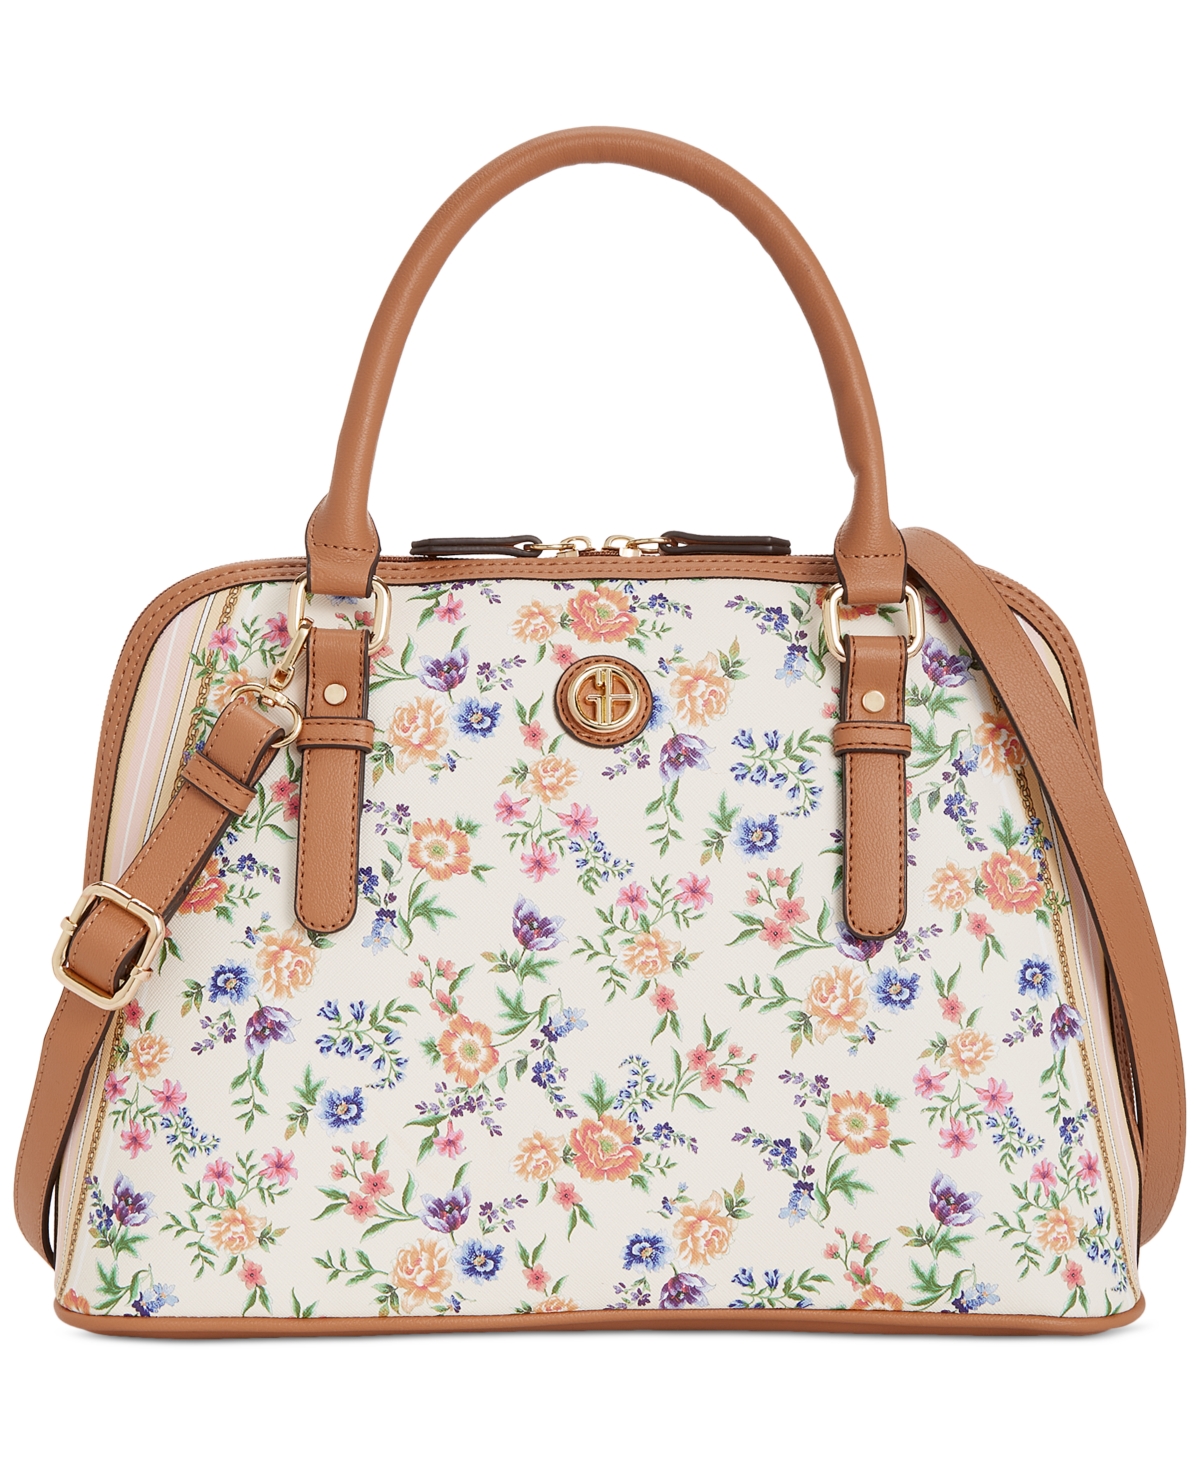 Saffiano Pastel Floral Medium Dome Satchel, Created for Macy's - Floral Multi